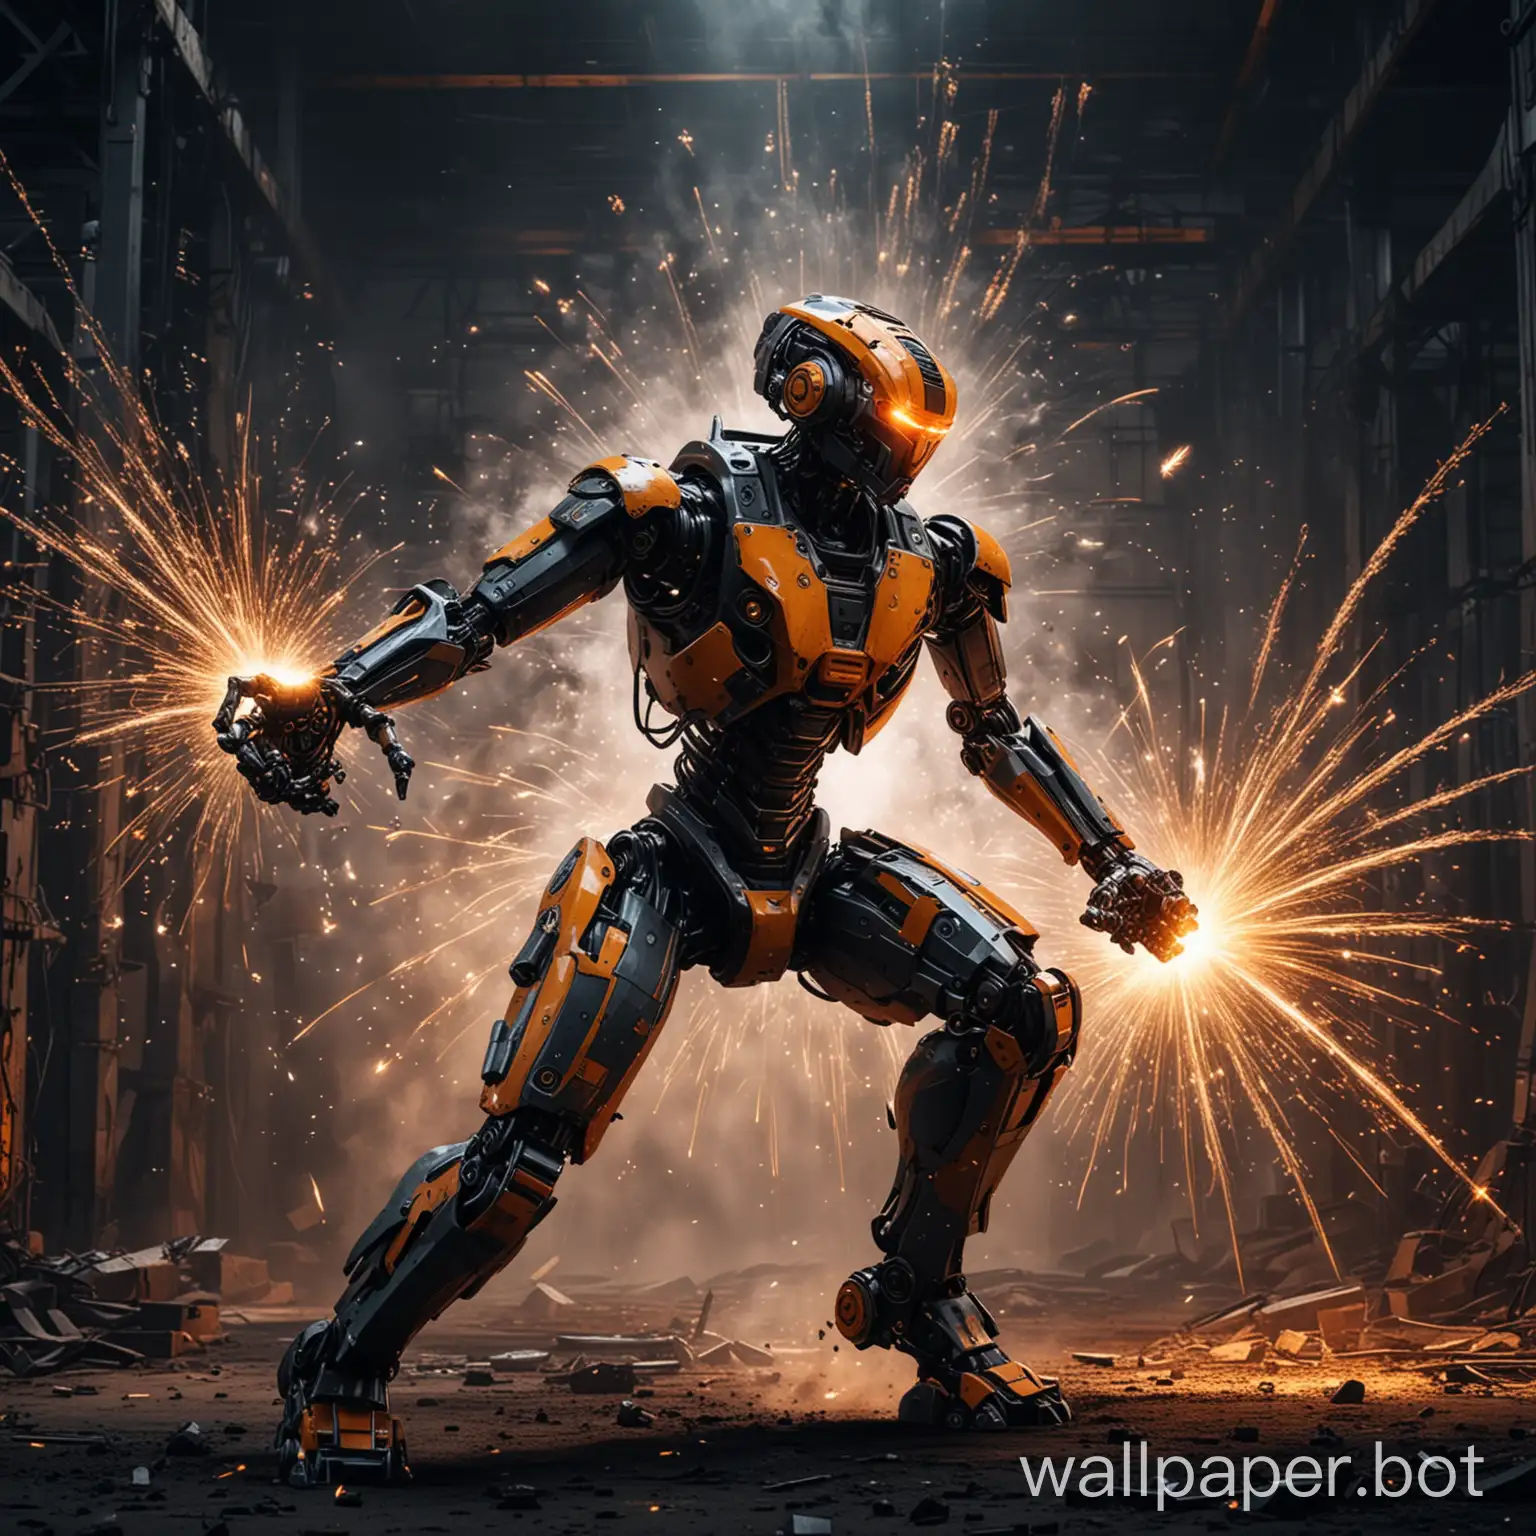 laser orange black style industrial with a robot ai in a epic pose combat with human half cyborg with in the backgroudn cutting and bending metal sheets and fireworks from metal 